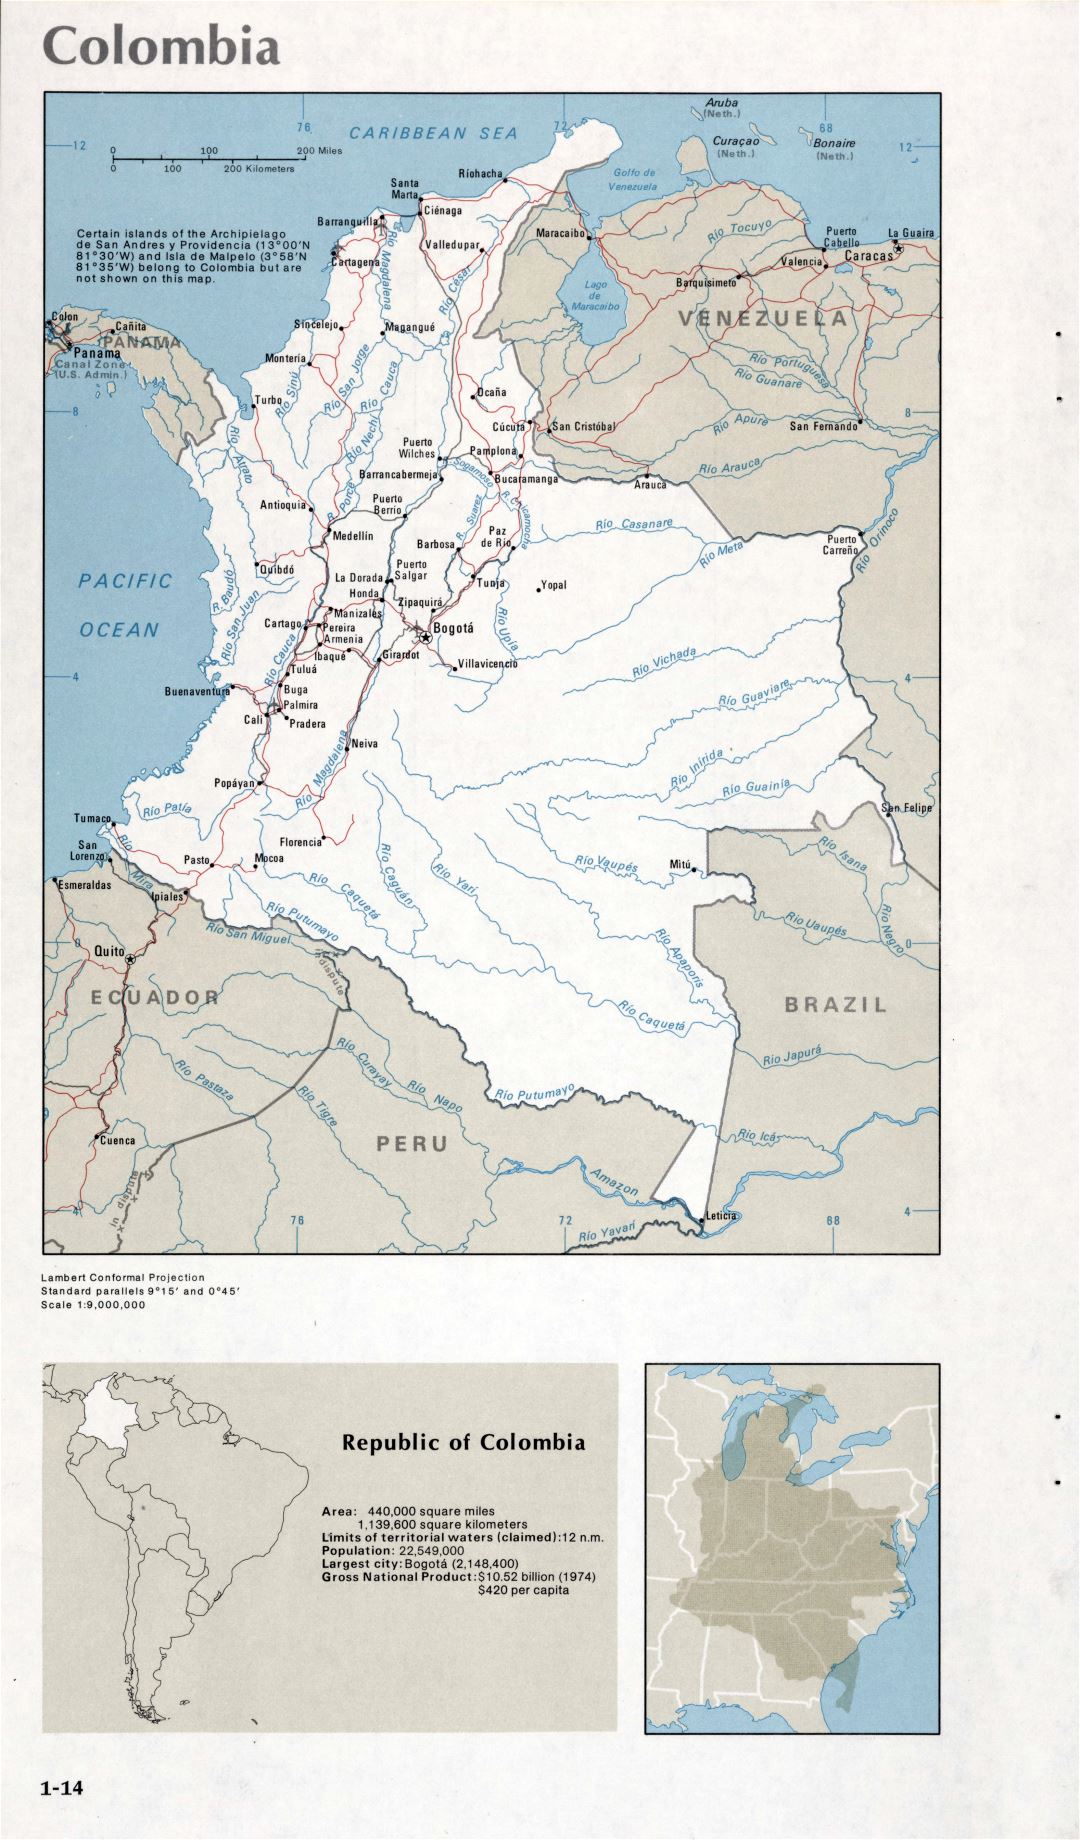 Map of Colombia (1-14)